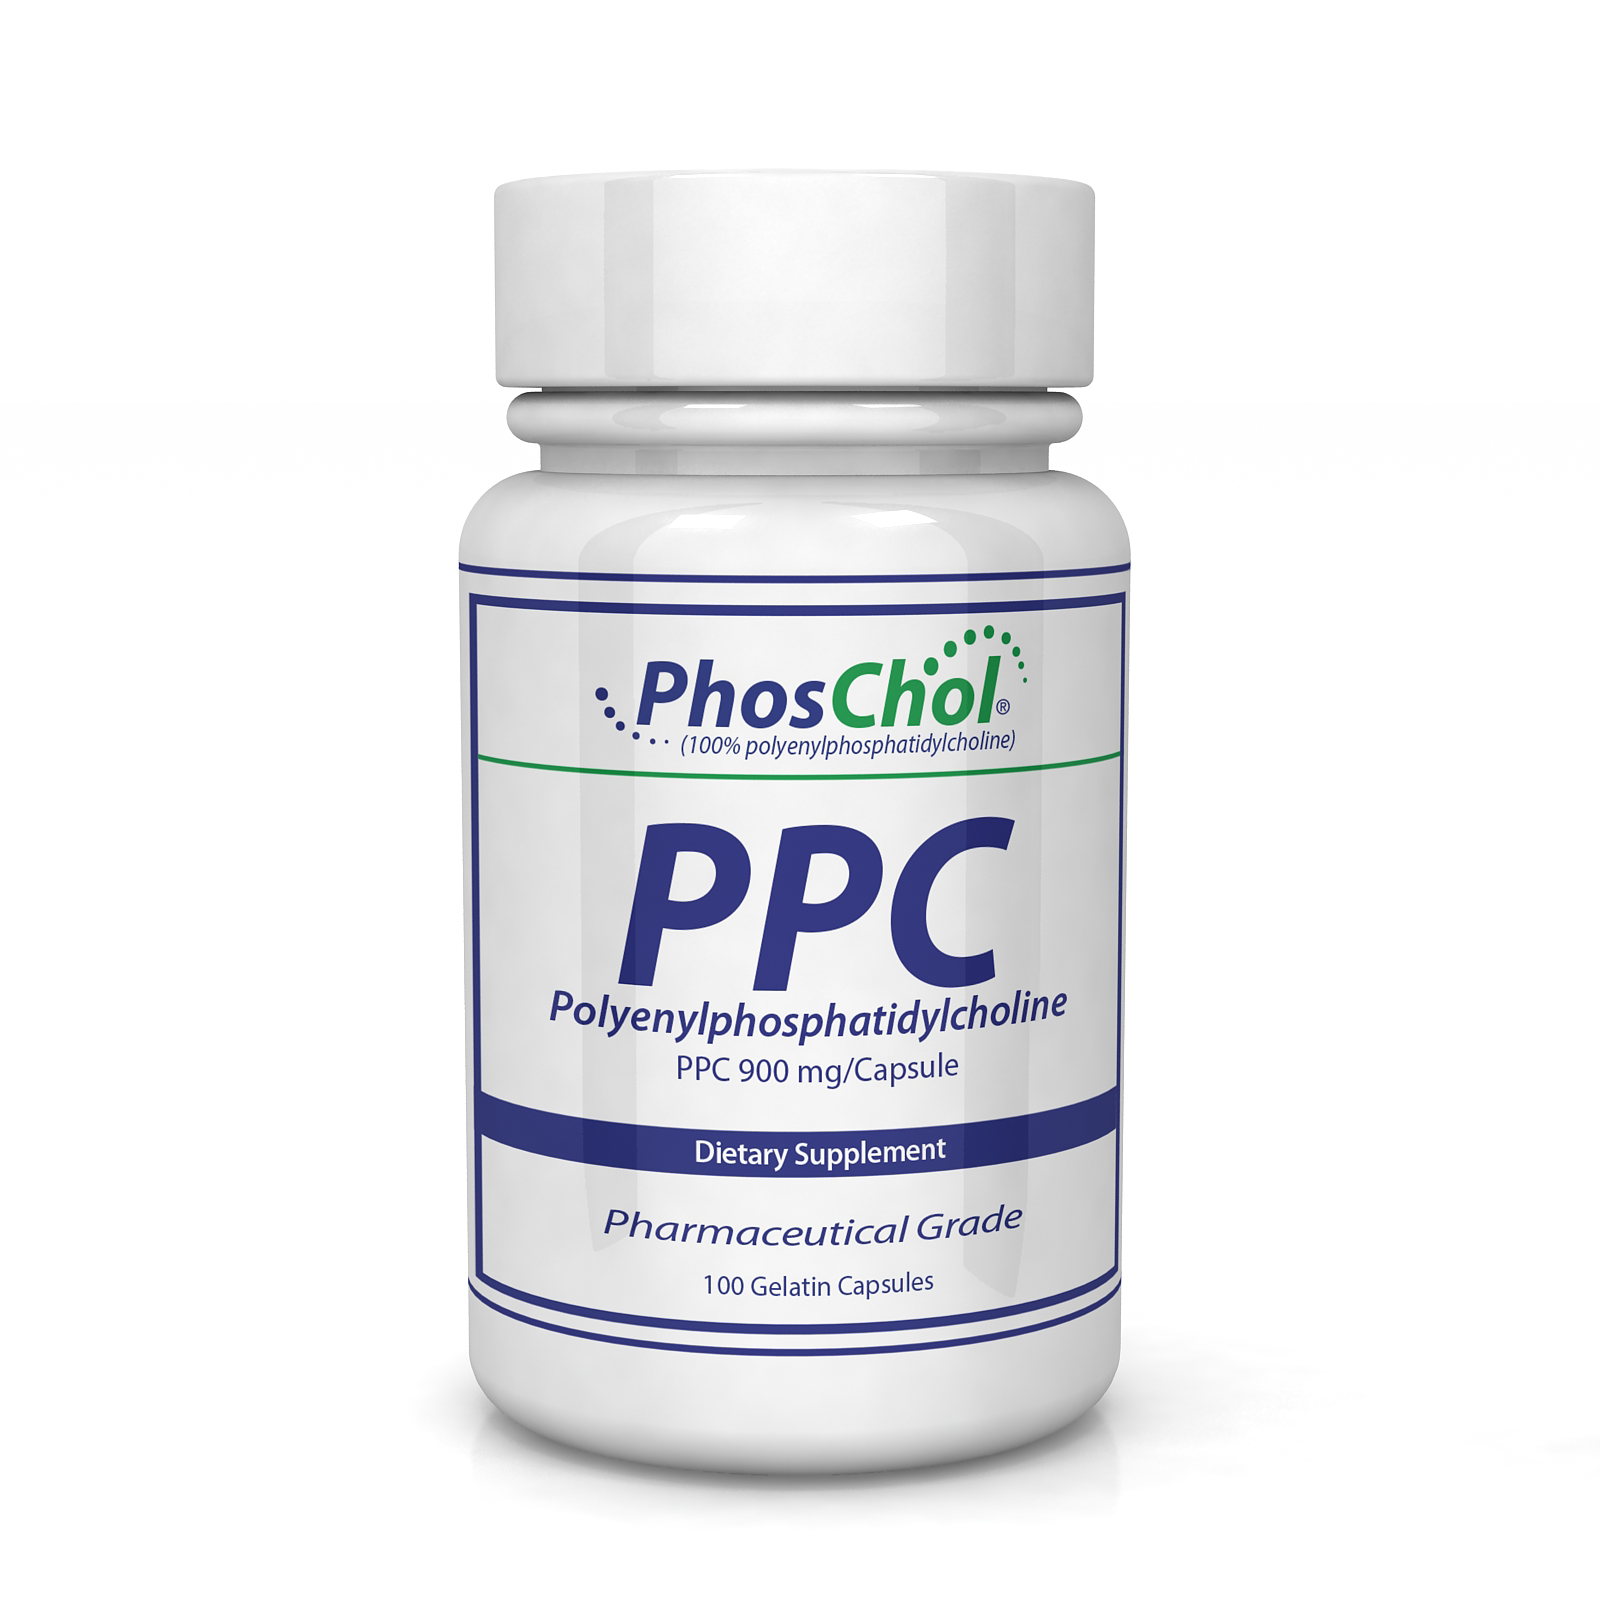 PhosChol Products